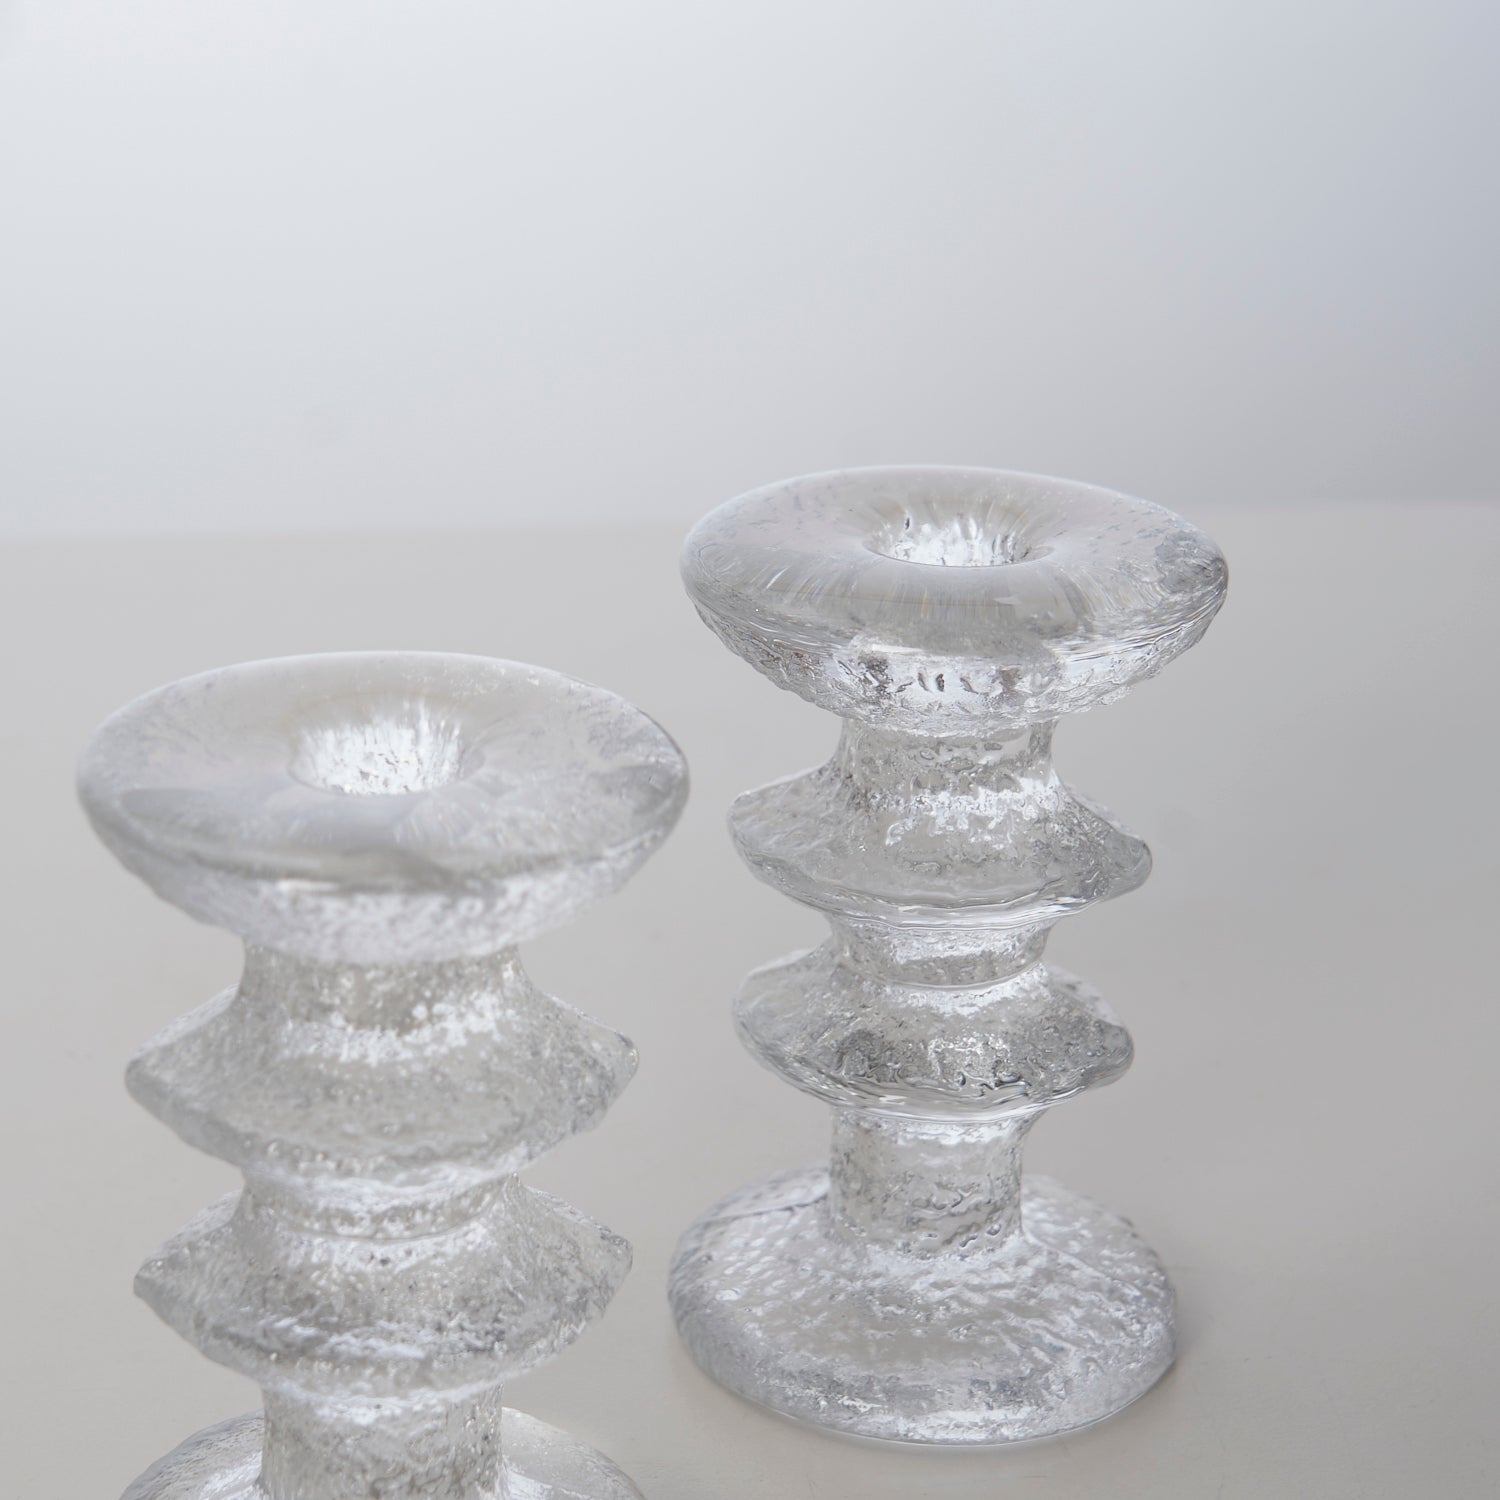 Pair of 'Festivo' Candle Holders by Timo Sarpeneva for Iittala, Finland